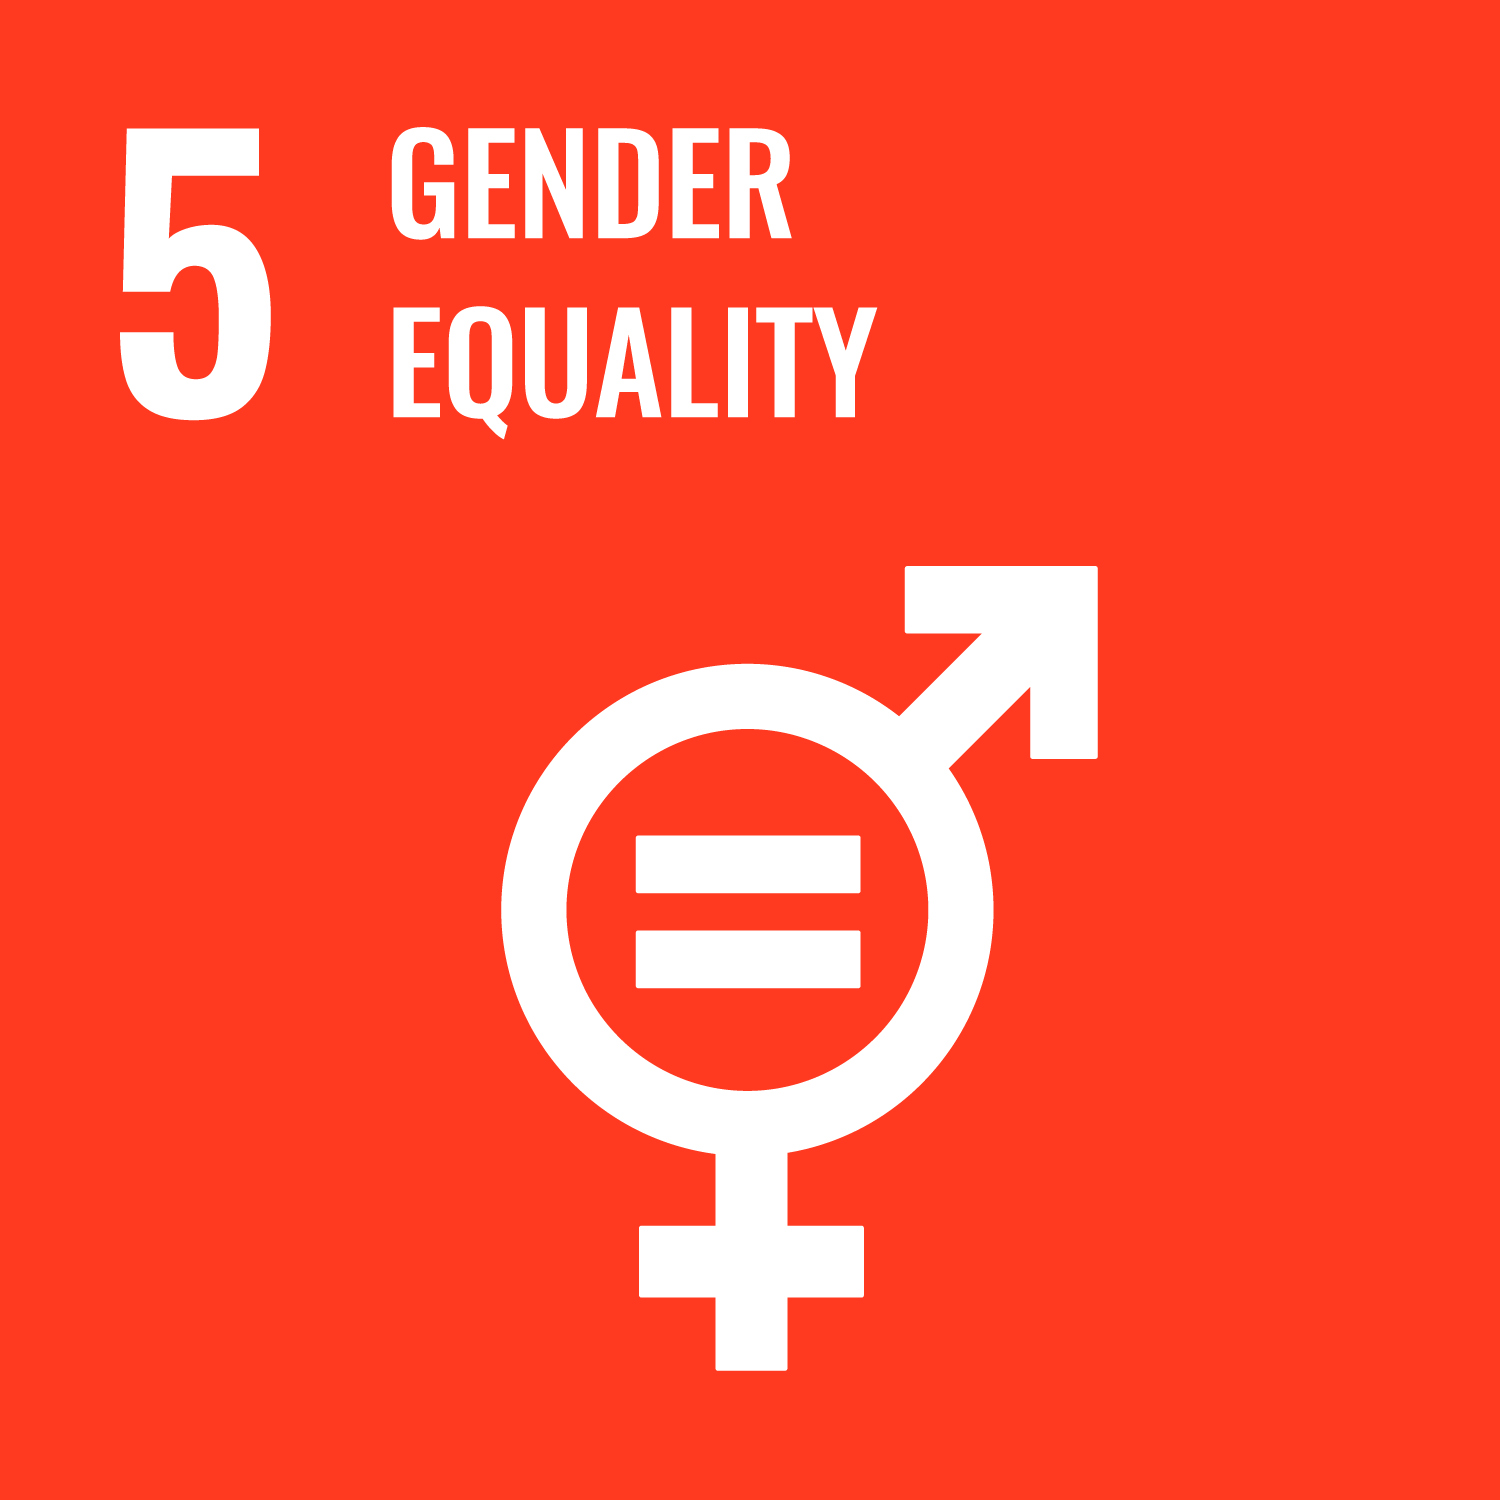 Regional Cooperation as an Effective Tool in Advancing Gender Equality